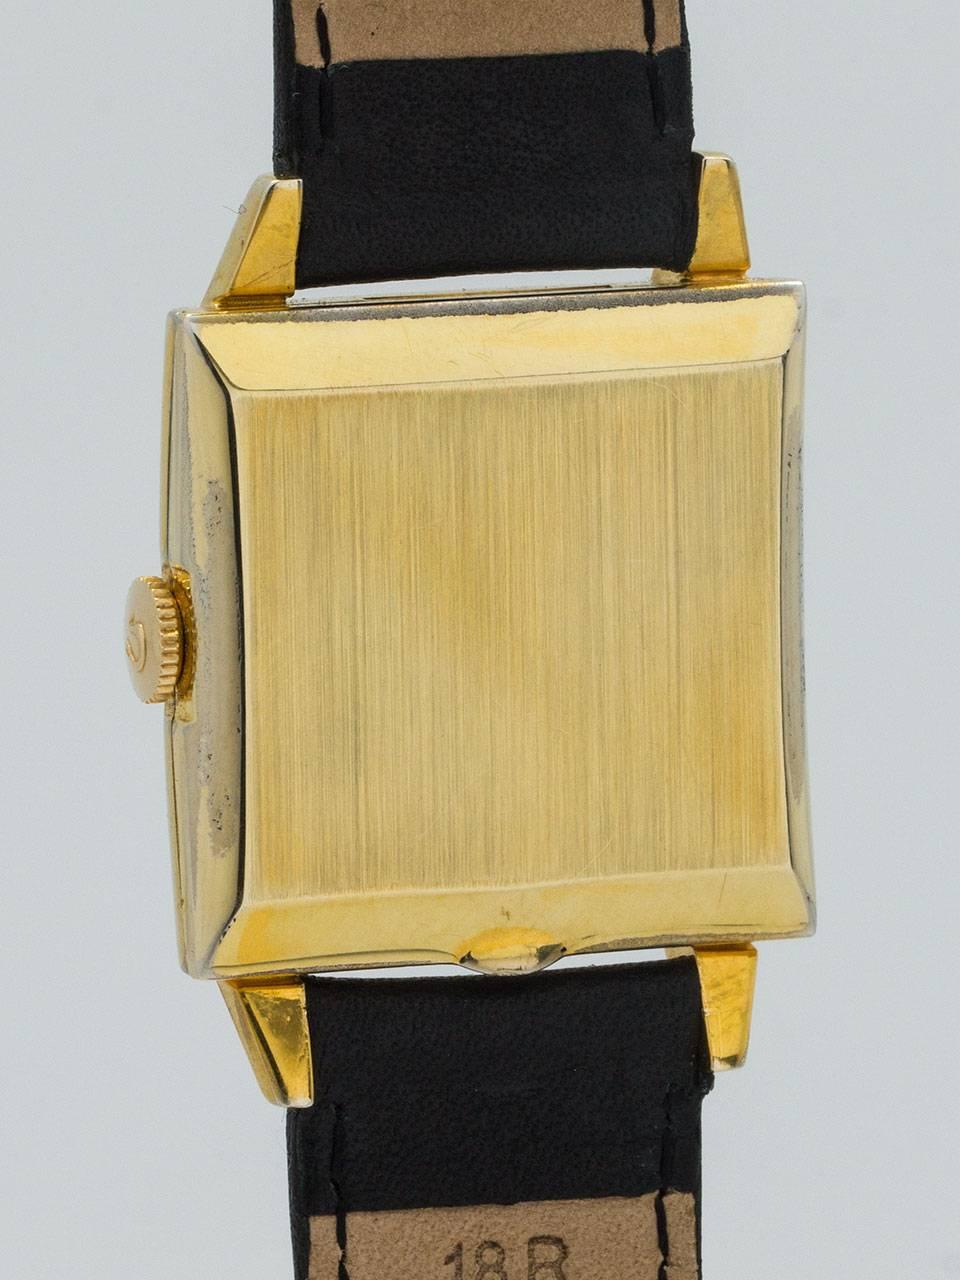 Men's Omega Yellow Gold Filled Automatic Dress Wristwatch ref 6253 circa 1956